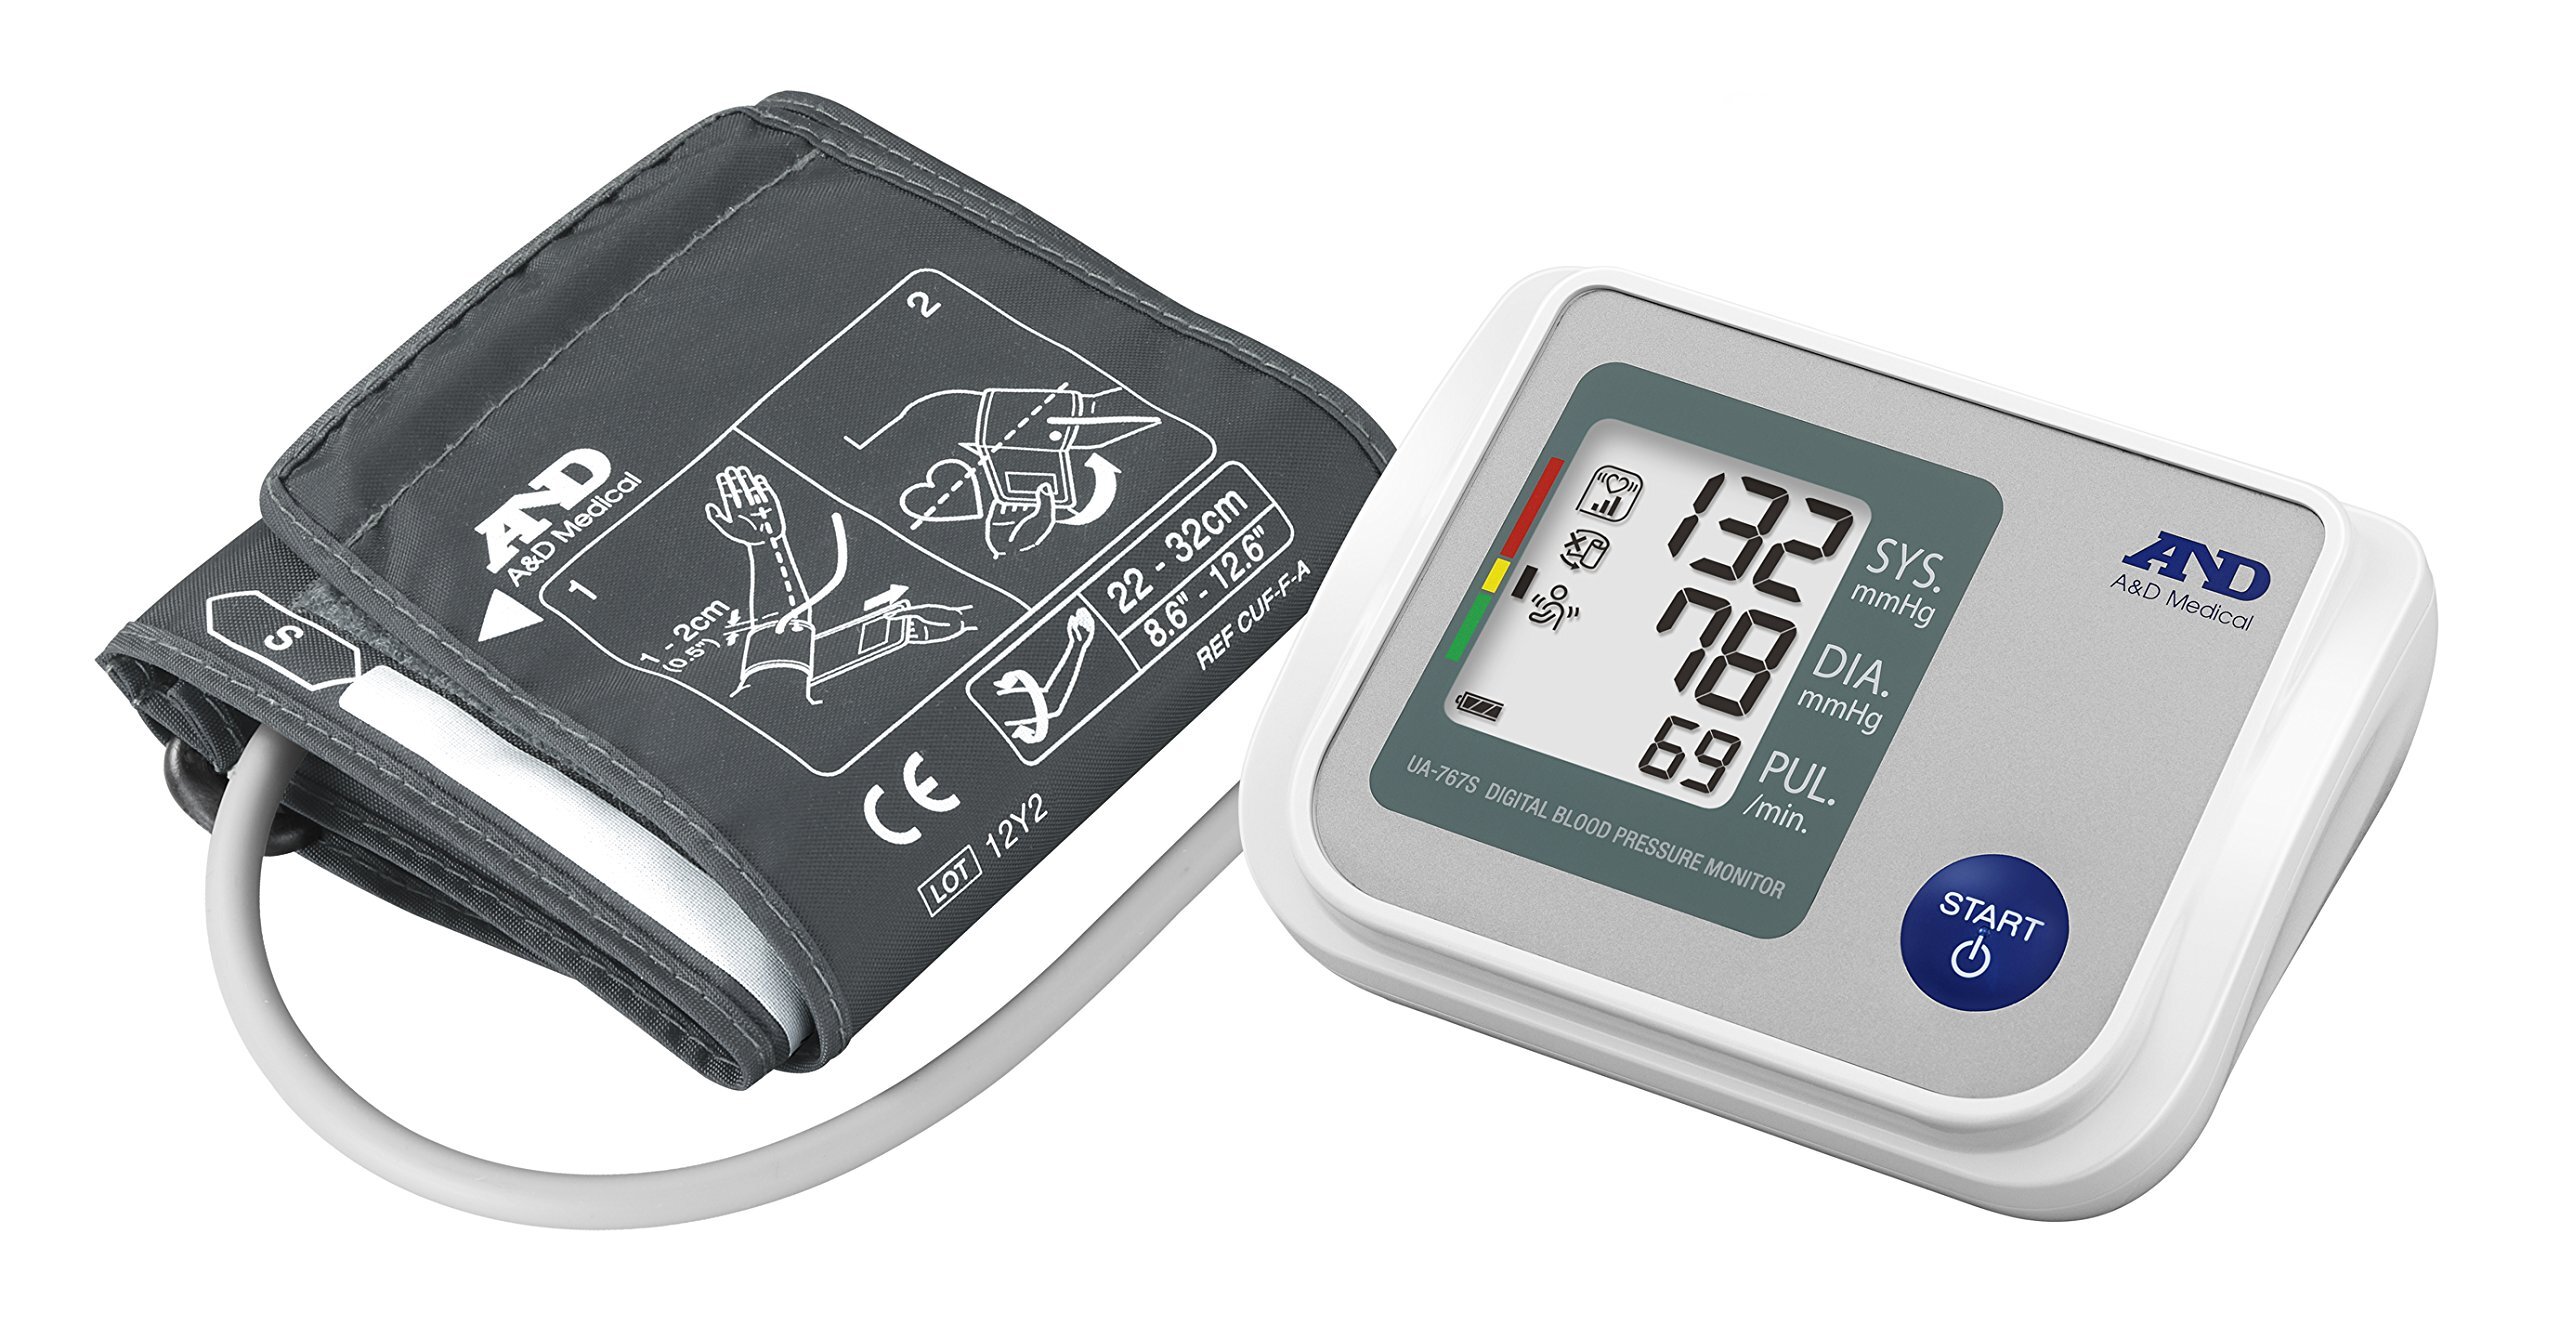 AND NEW 2016 Model: AND UA-767S Digital Blood Pressure Monitor by